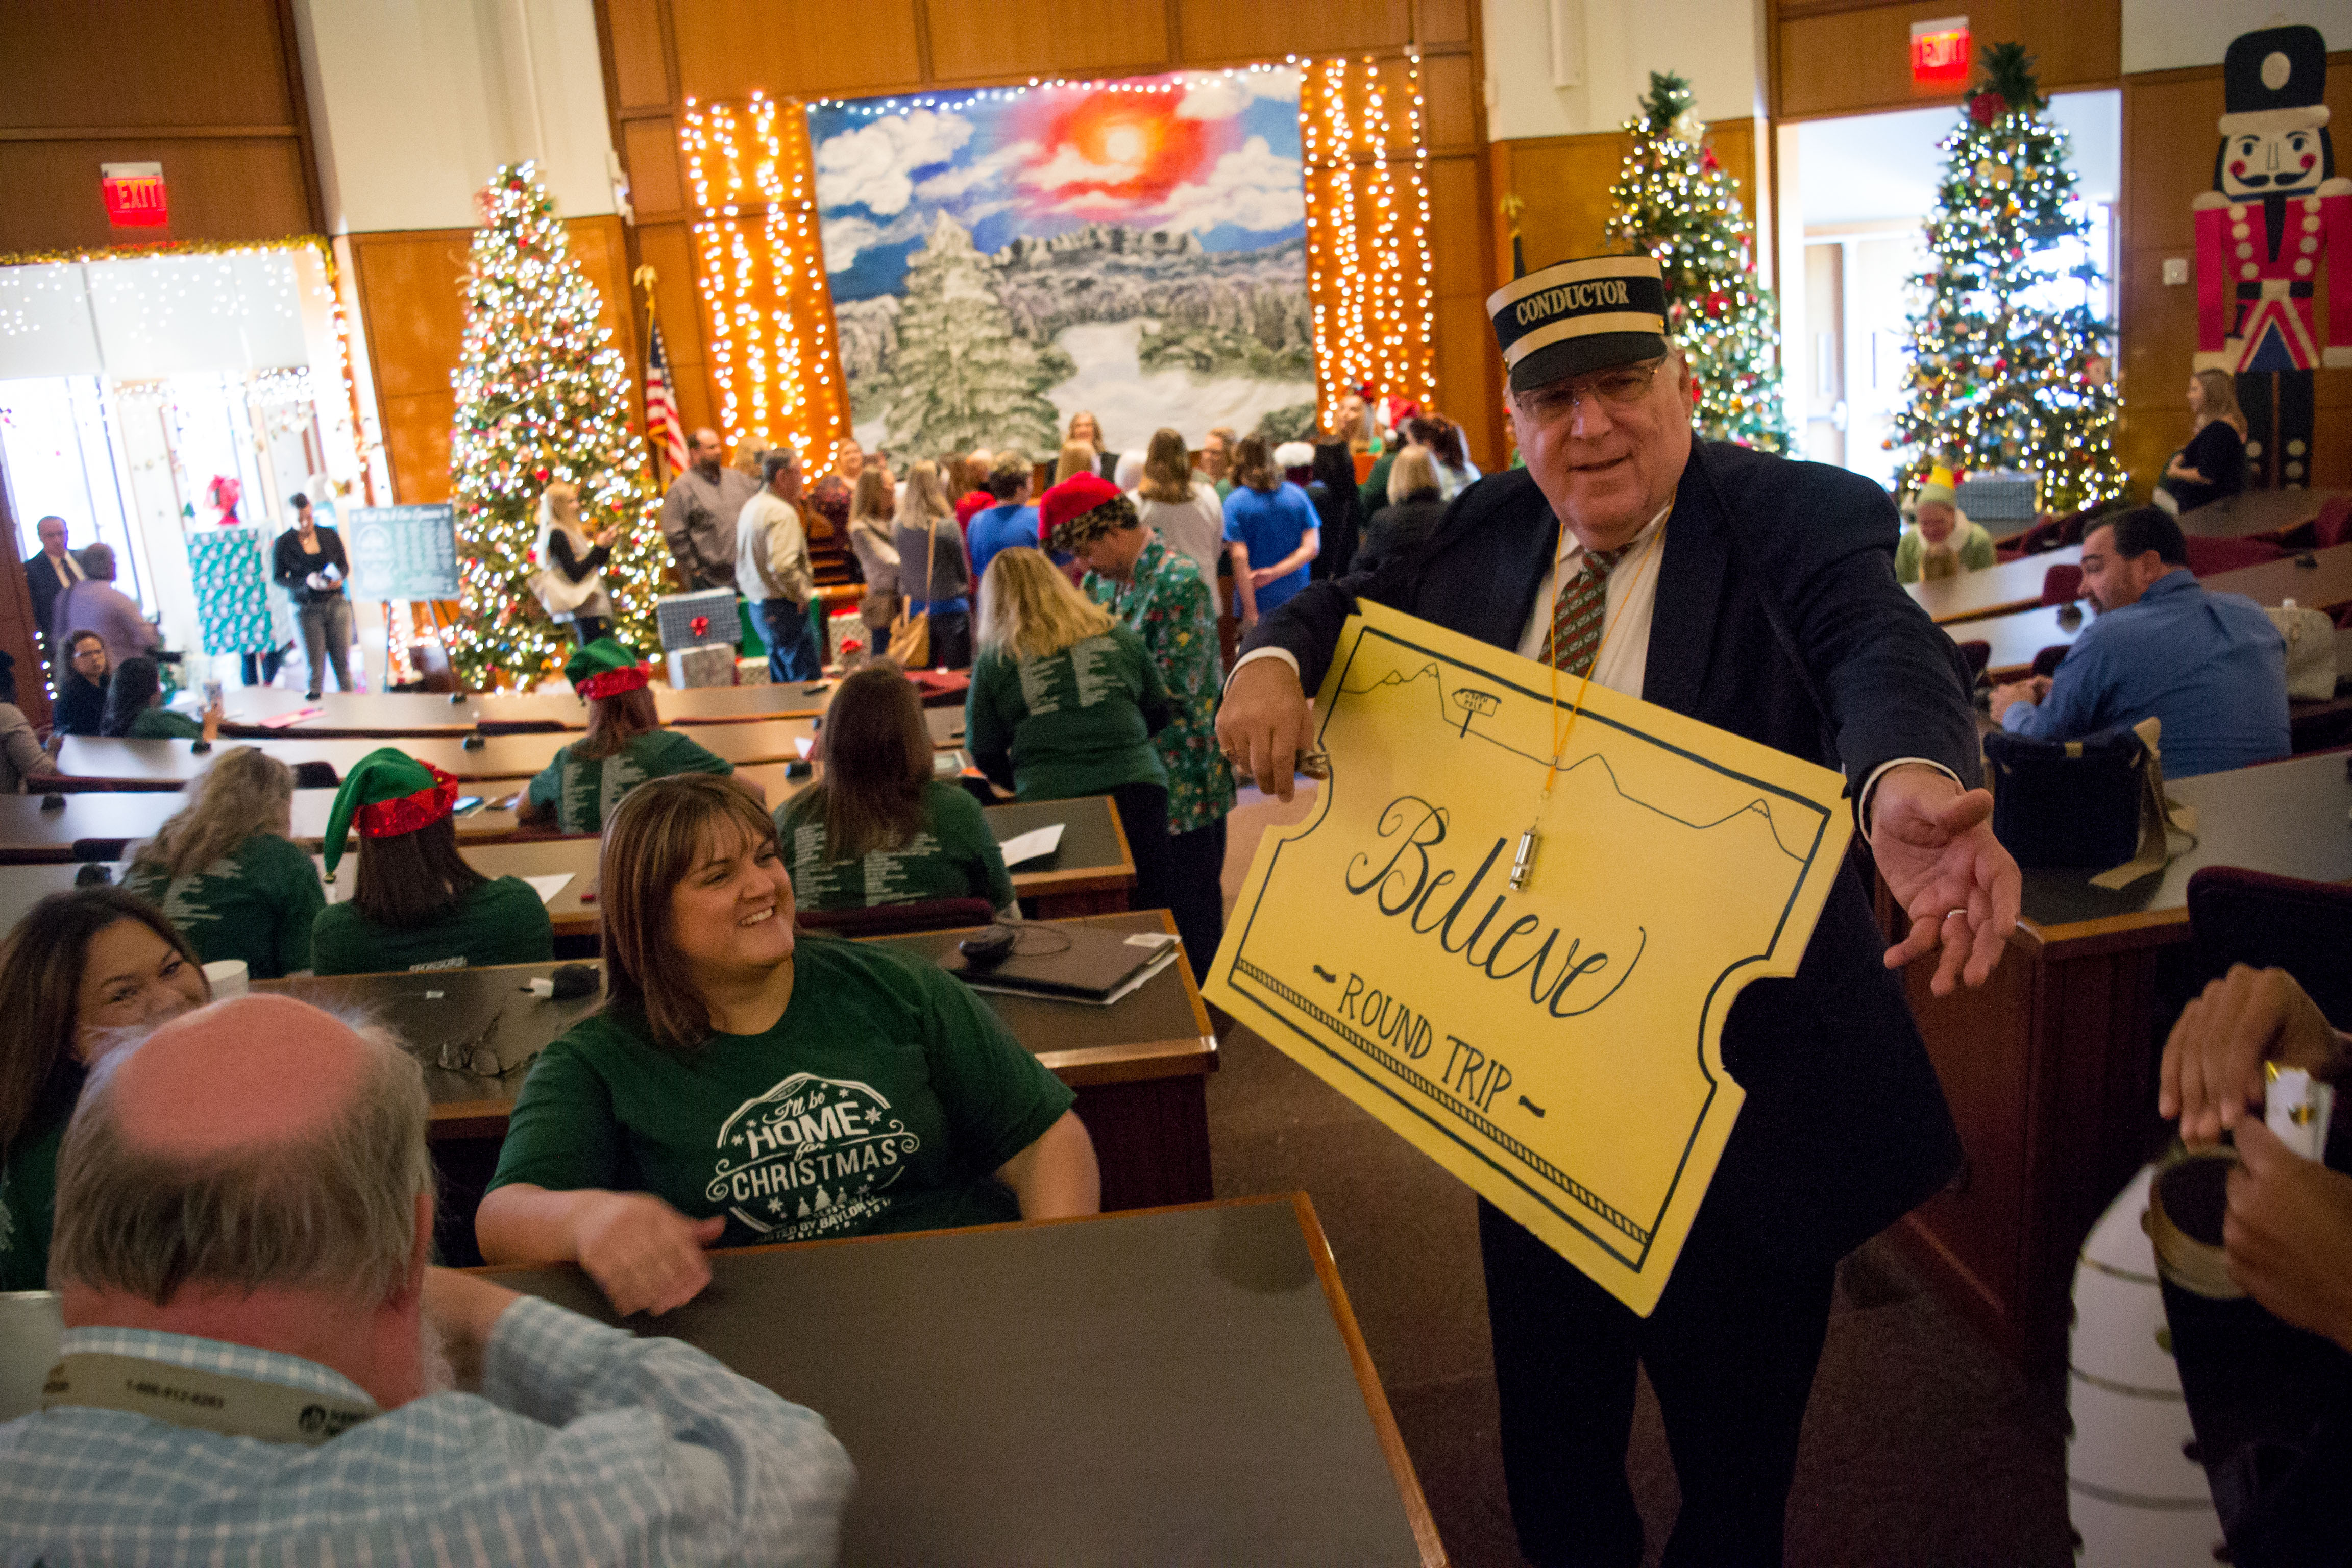 Man dressed as the conductor from 'The Polar Express' entertains families. Several Christmas trees and decorations visible in the background.